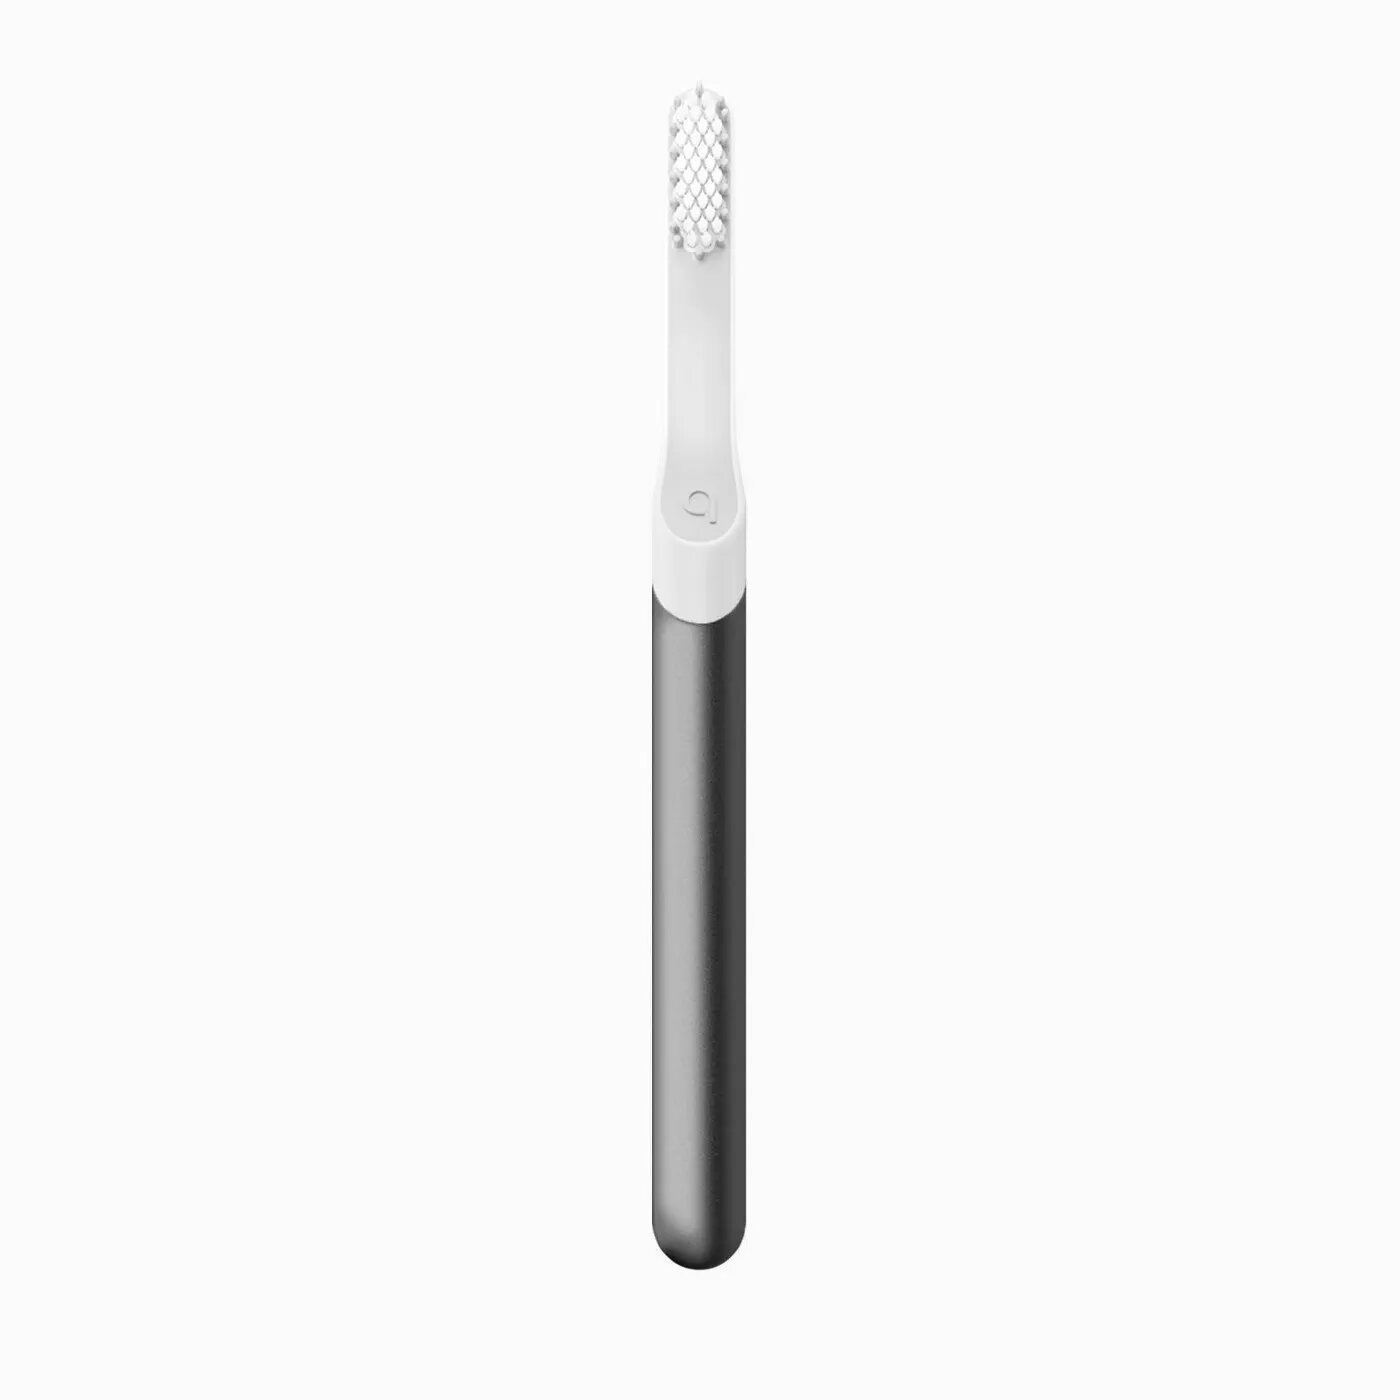 quip Electric Toothbrush, Built-In Timer + Travel Case, Slate Metal - image 2 of 6